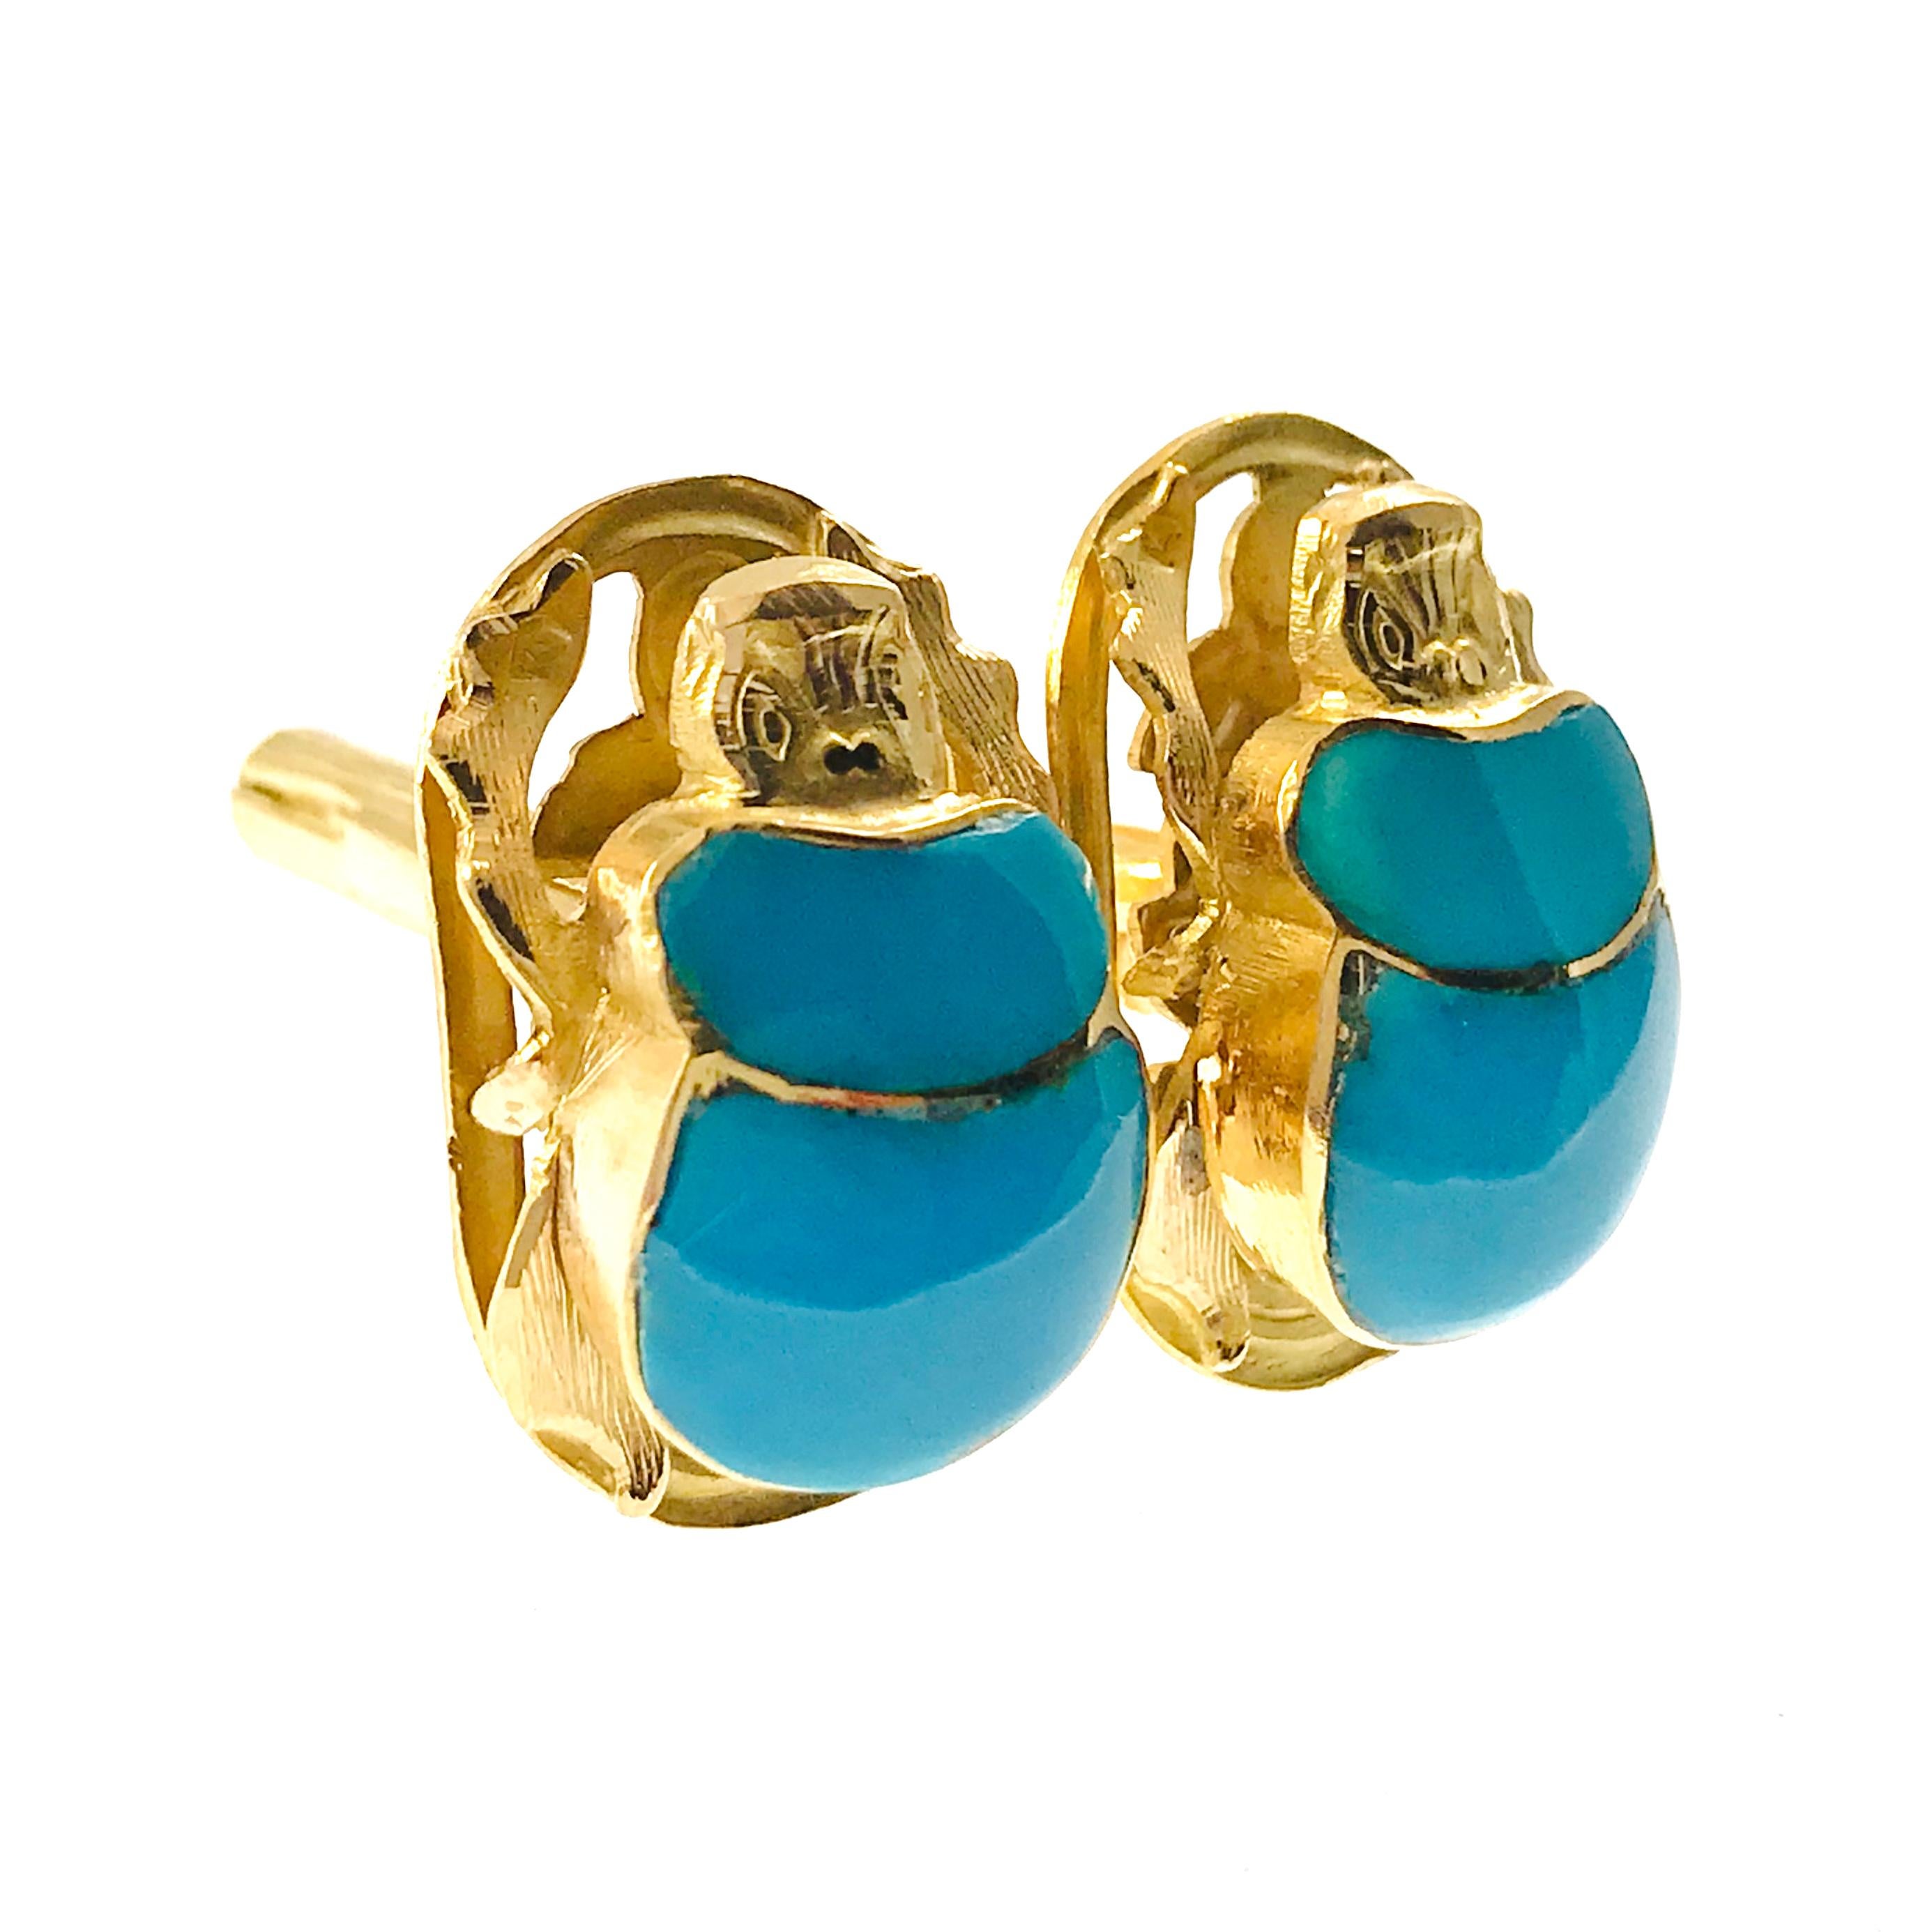 18 Karat Turquoise Scarab Egyptian Cufflinks. The fronts feature a gold scarab beetle with two pieces of blue-green turquoise as the body. The cufflinks have a detailed back, a dual post, and torpedo toggle. The cufflink measure approximately 24mm x